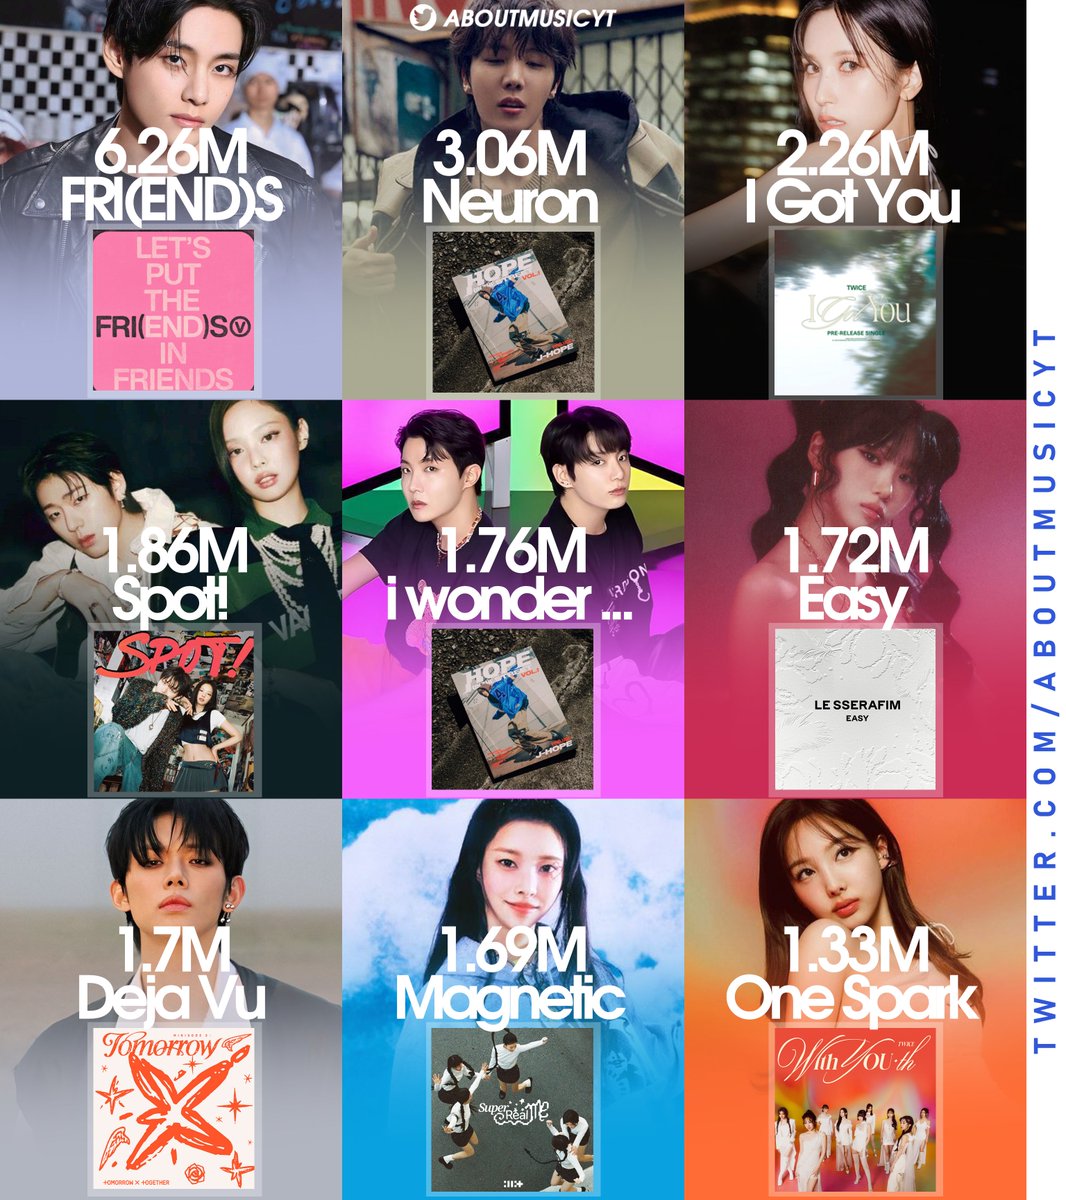 Biggest debuts of kpop artists on Spotify counter this year: